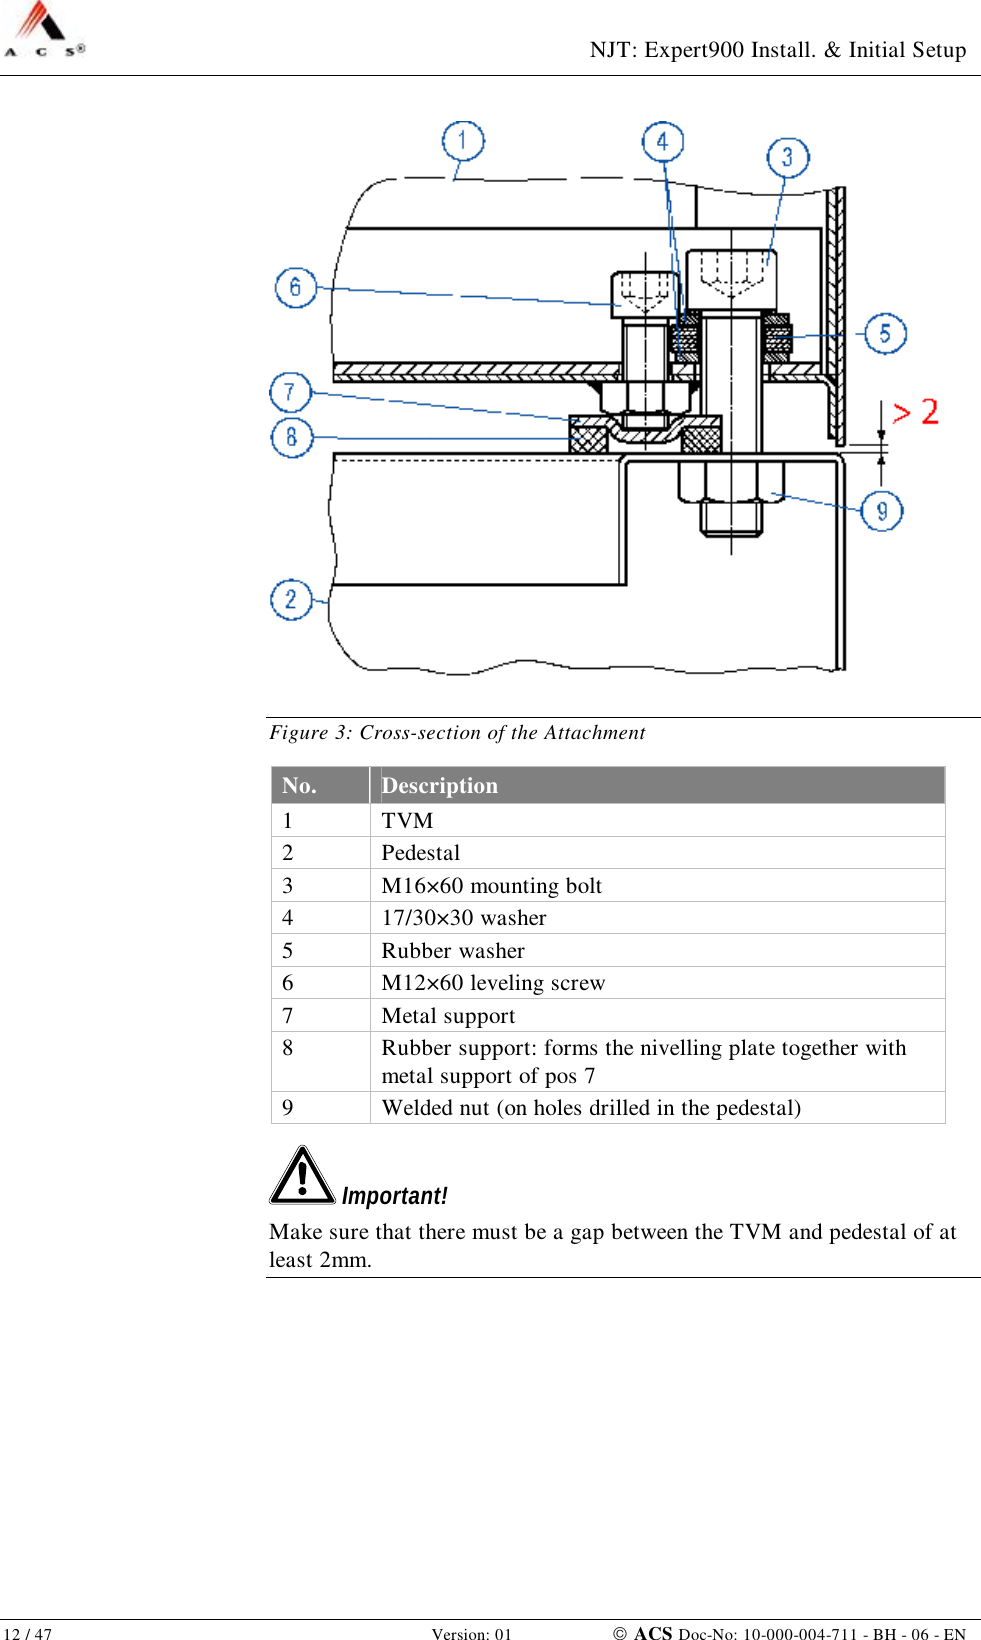  NJT: Expert900 Install. &amp; Initial Setup 12 / 47   Version: 01    ACS Doc-No: 10-000-004-711 - BH - 06 - EN  Figure 3: Cross-section of the Attachment No.  Description 1  TVM 2  Pedestal  3  M16×60 mounting bolt 4  17/30×30 washer 5  Rubber washer 6  M12×60 leveling screw 7  Metal support 8  Rubber support: forms the nivelling plate together with metal support of pos 7 9  Welded nut (on holes drilled in the pedestal)  Important! Make sure that there must be a gap between the TVM and pedestal of at least 2mm. 